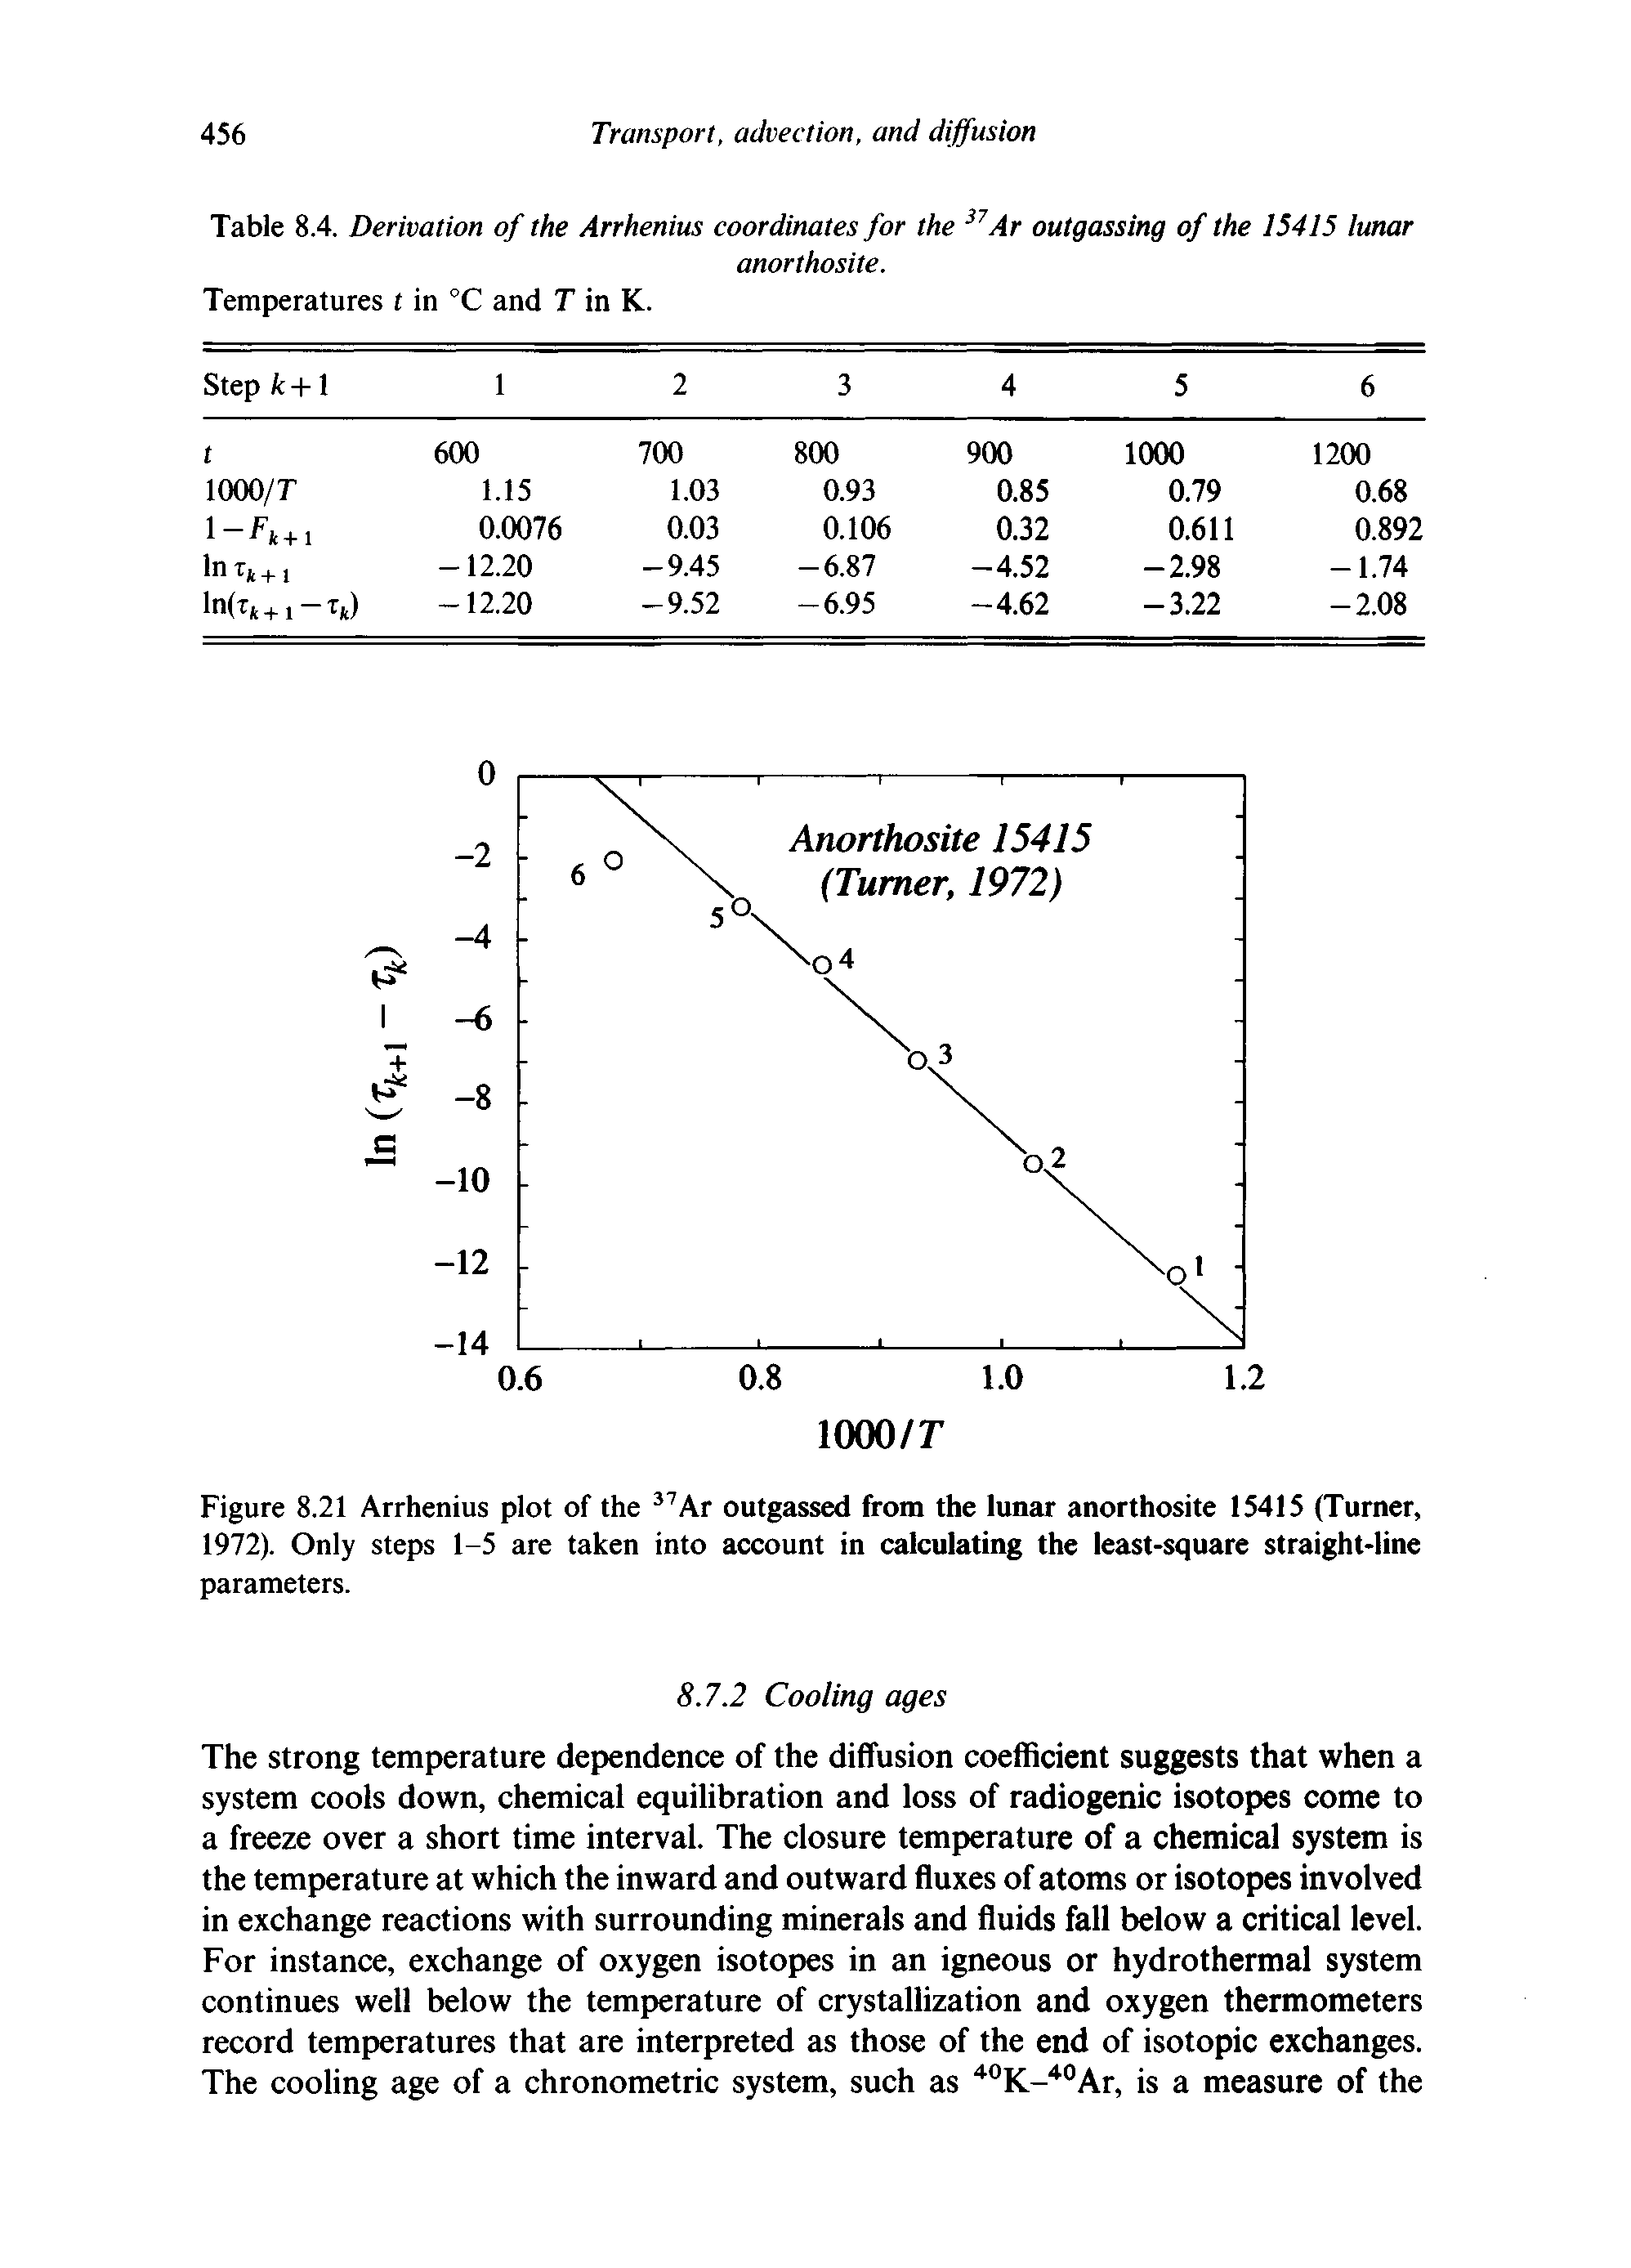 Figure 8.21 Arrhenius plot of the 37Ar outgassed from the lunar anorthosite 15415 (Turner, 1972). Only steps 1-5 are taken into account in calculating the least-square straight-line...